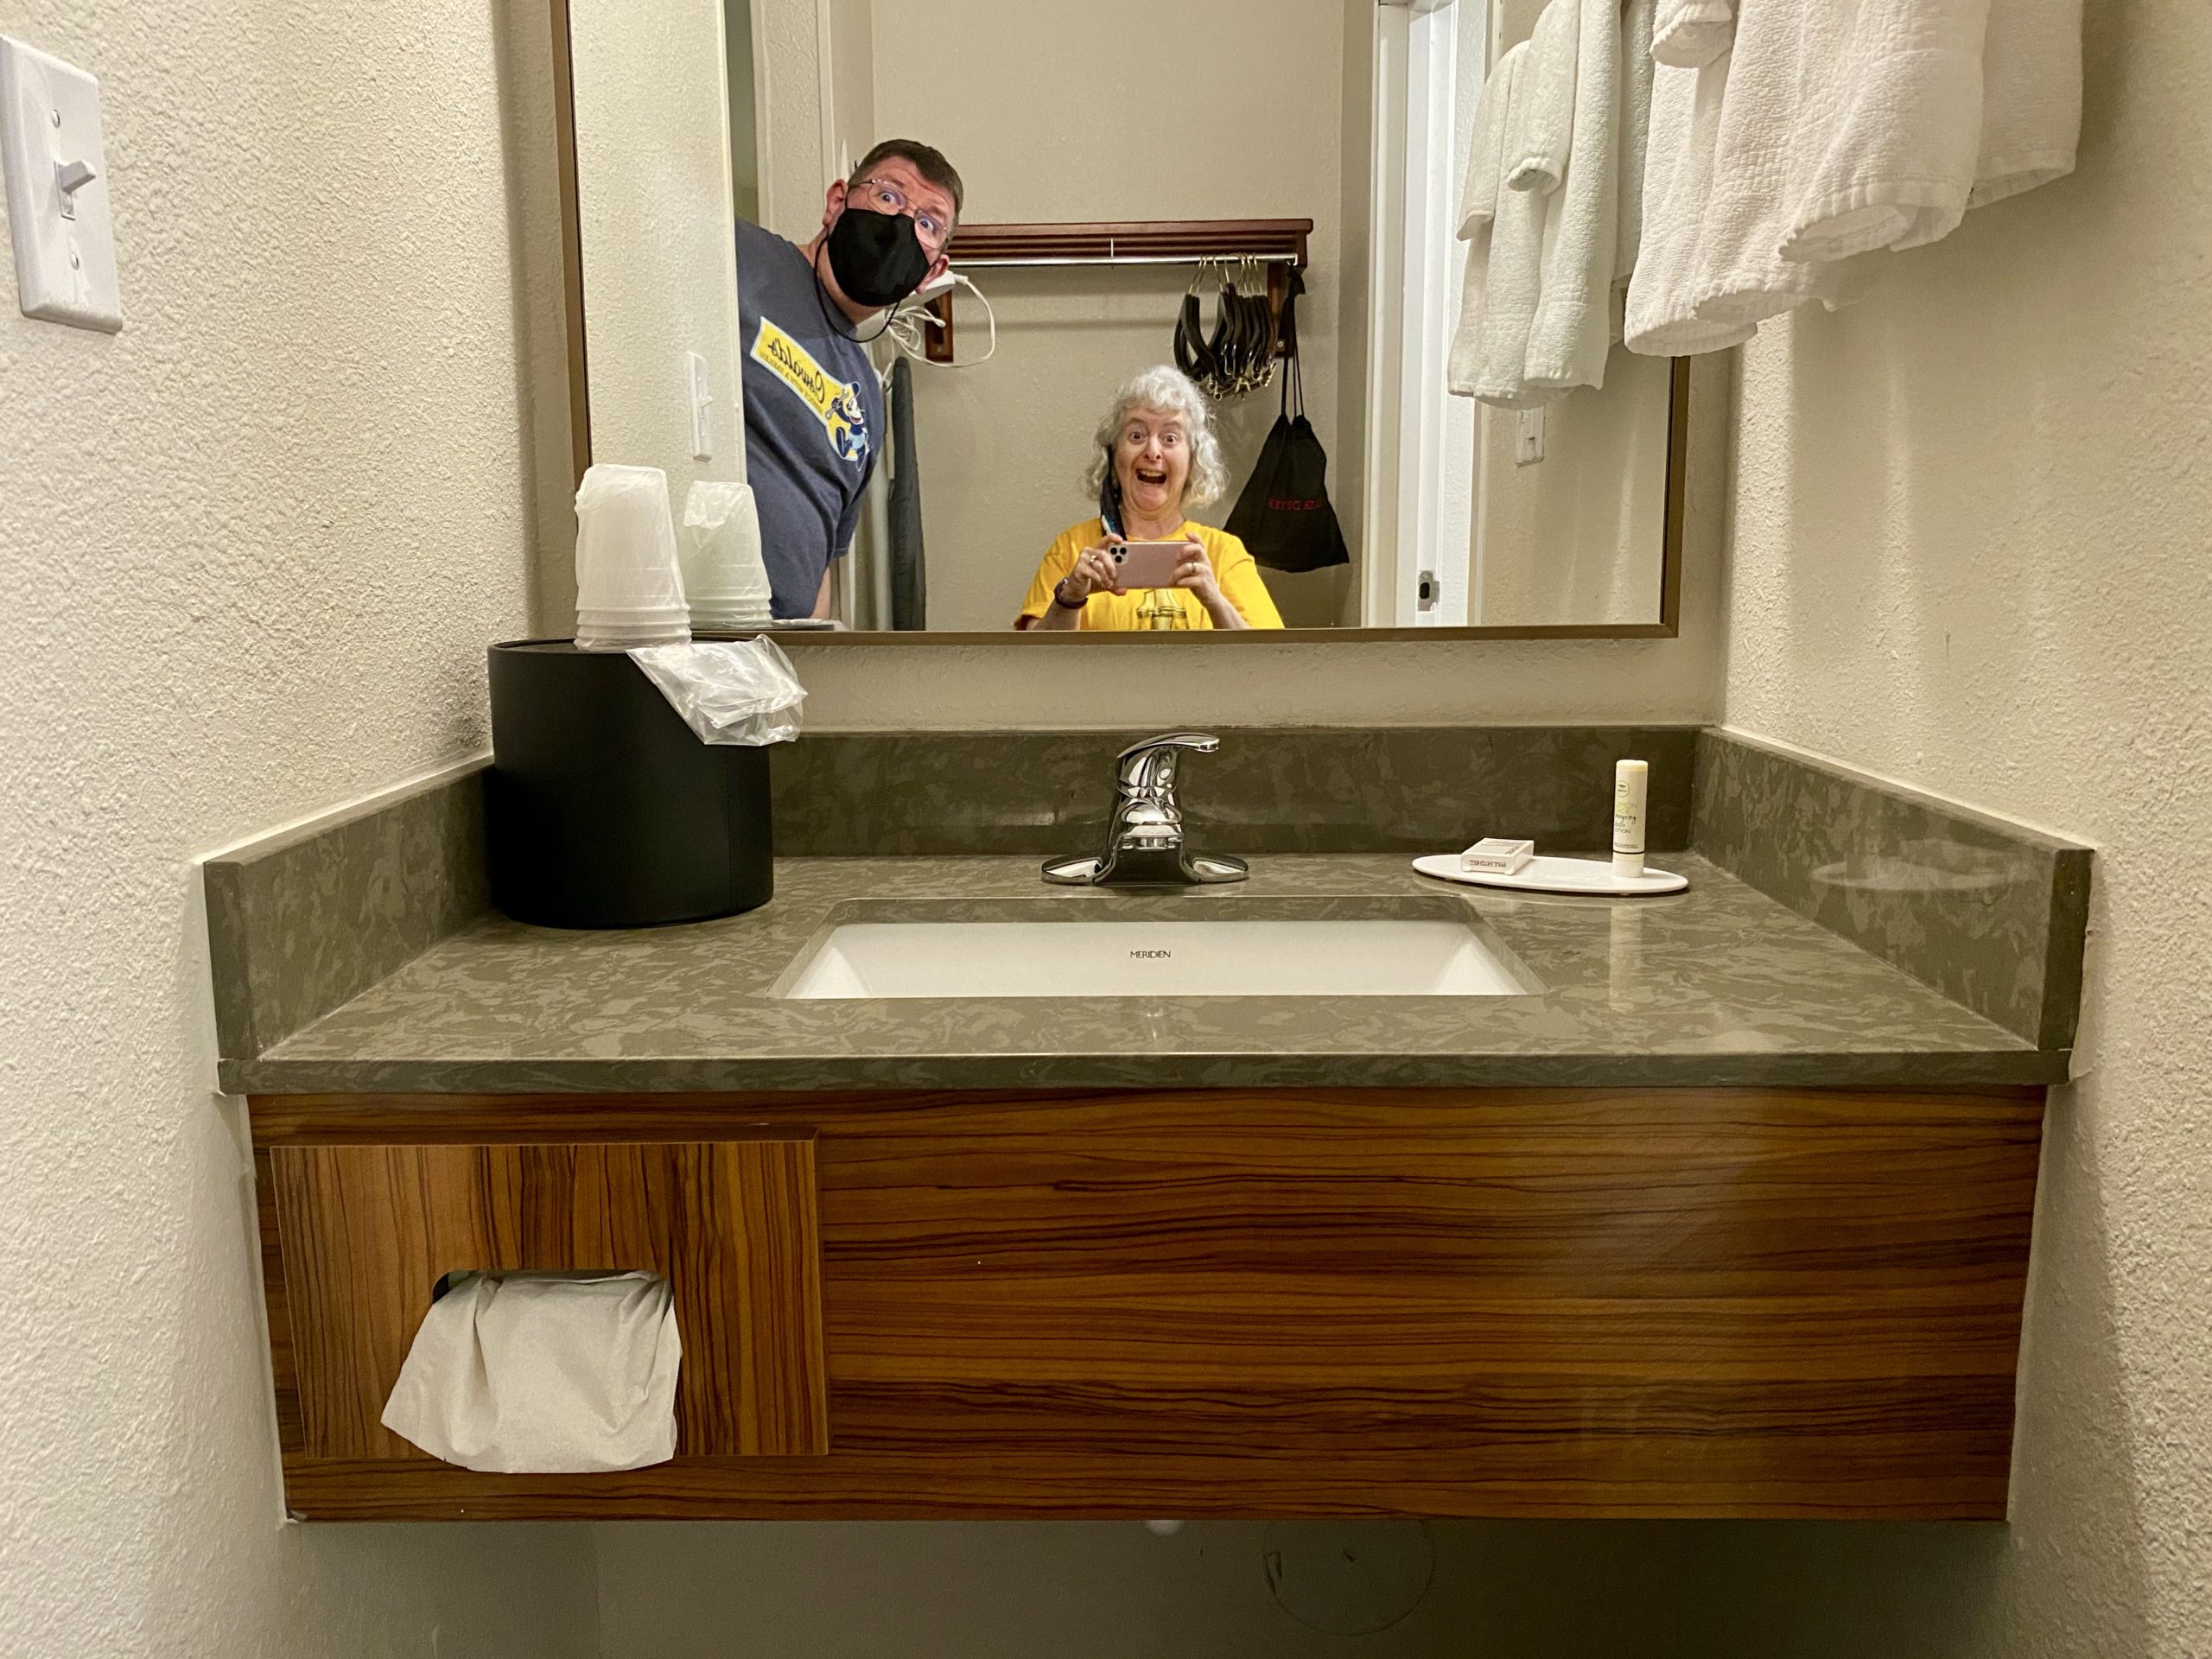 a man and woman taking a selfie in a bathroom